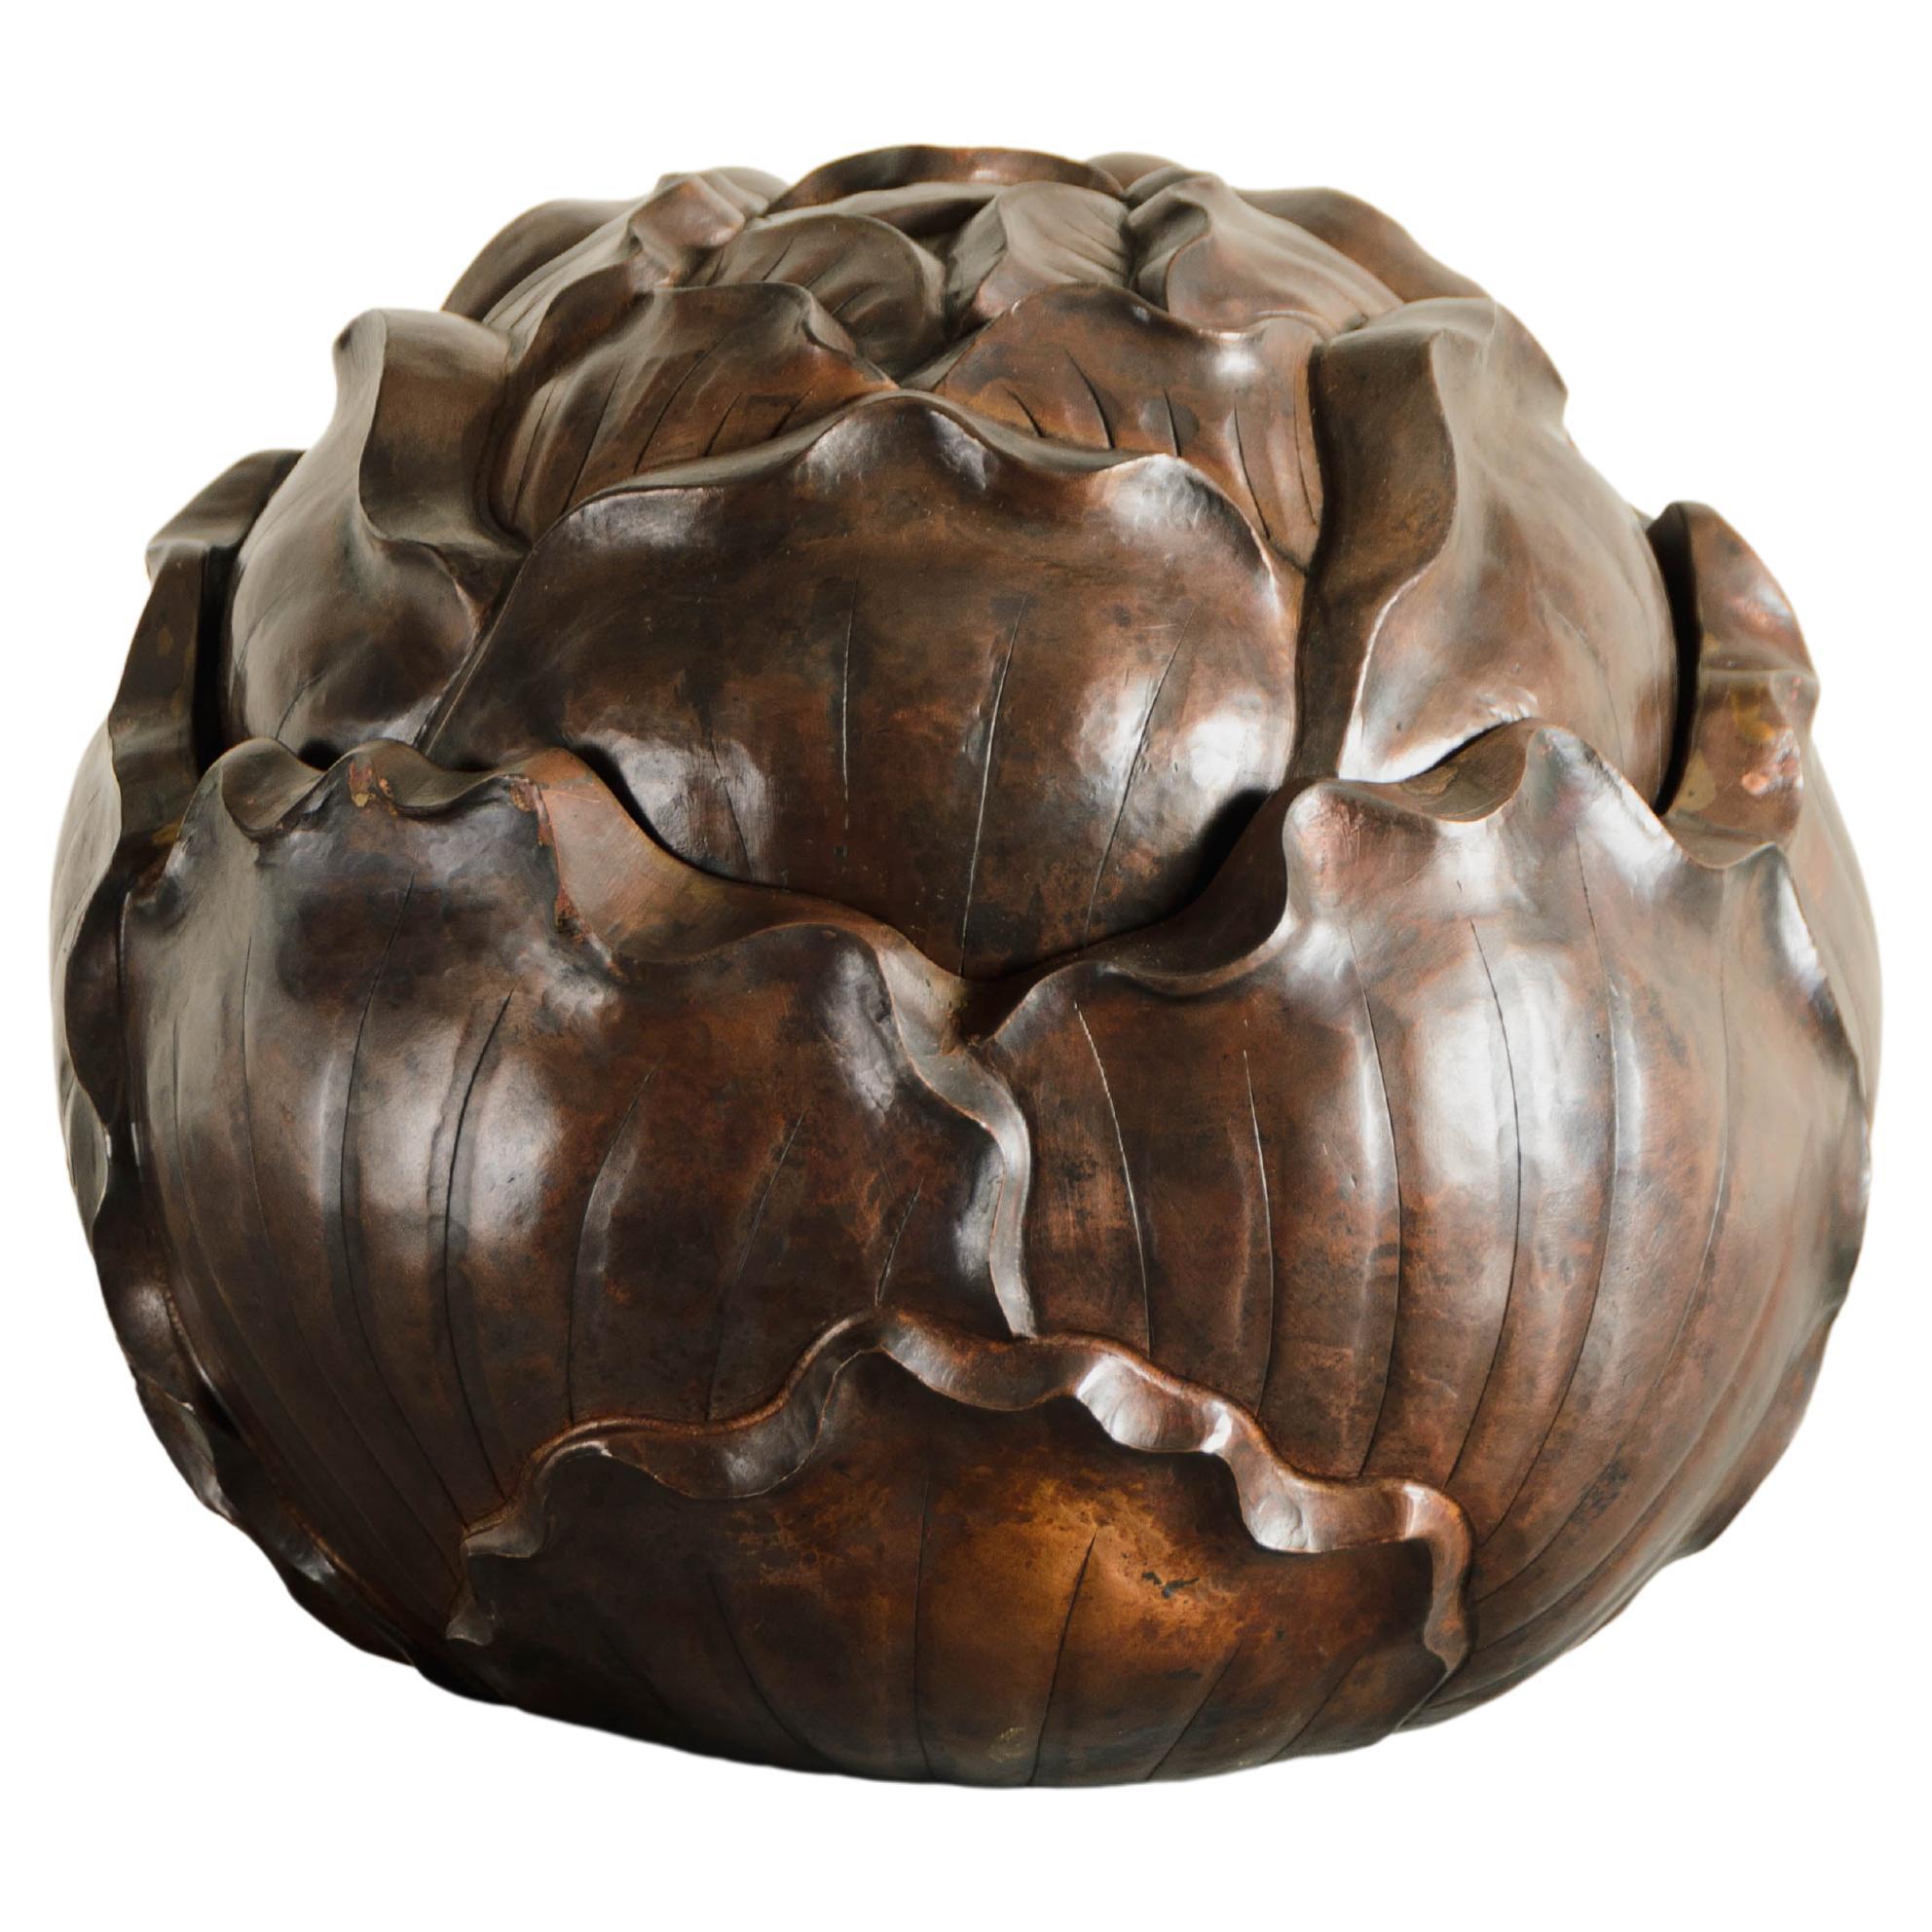 Contemporary Hand Repoussé Peony Box in Antique Copper by Robert Kuo